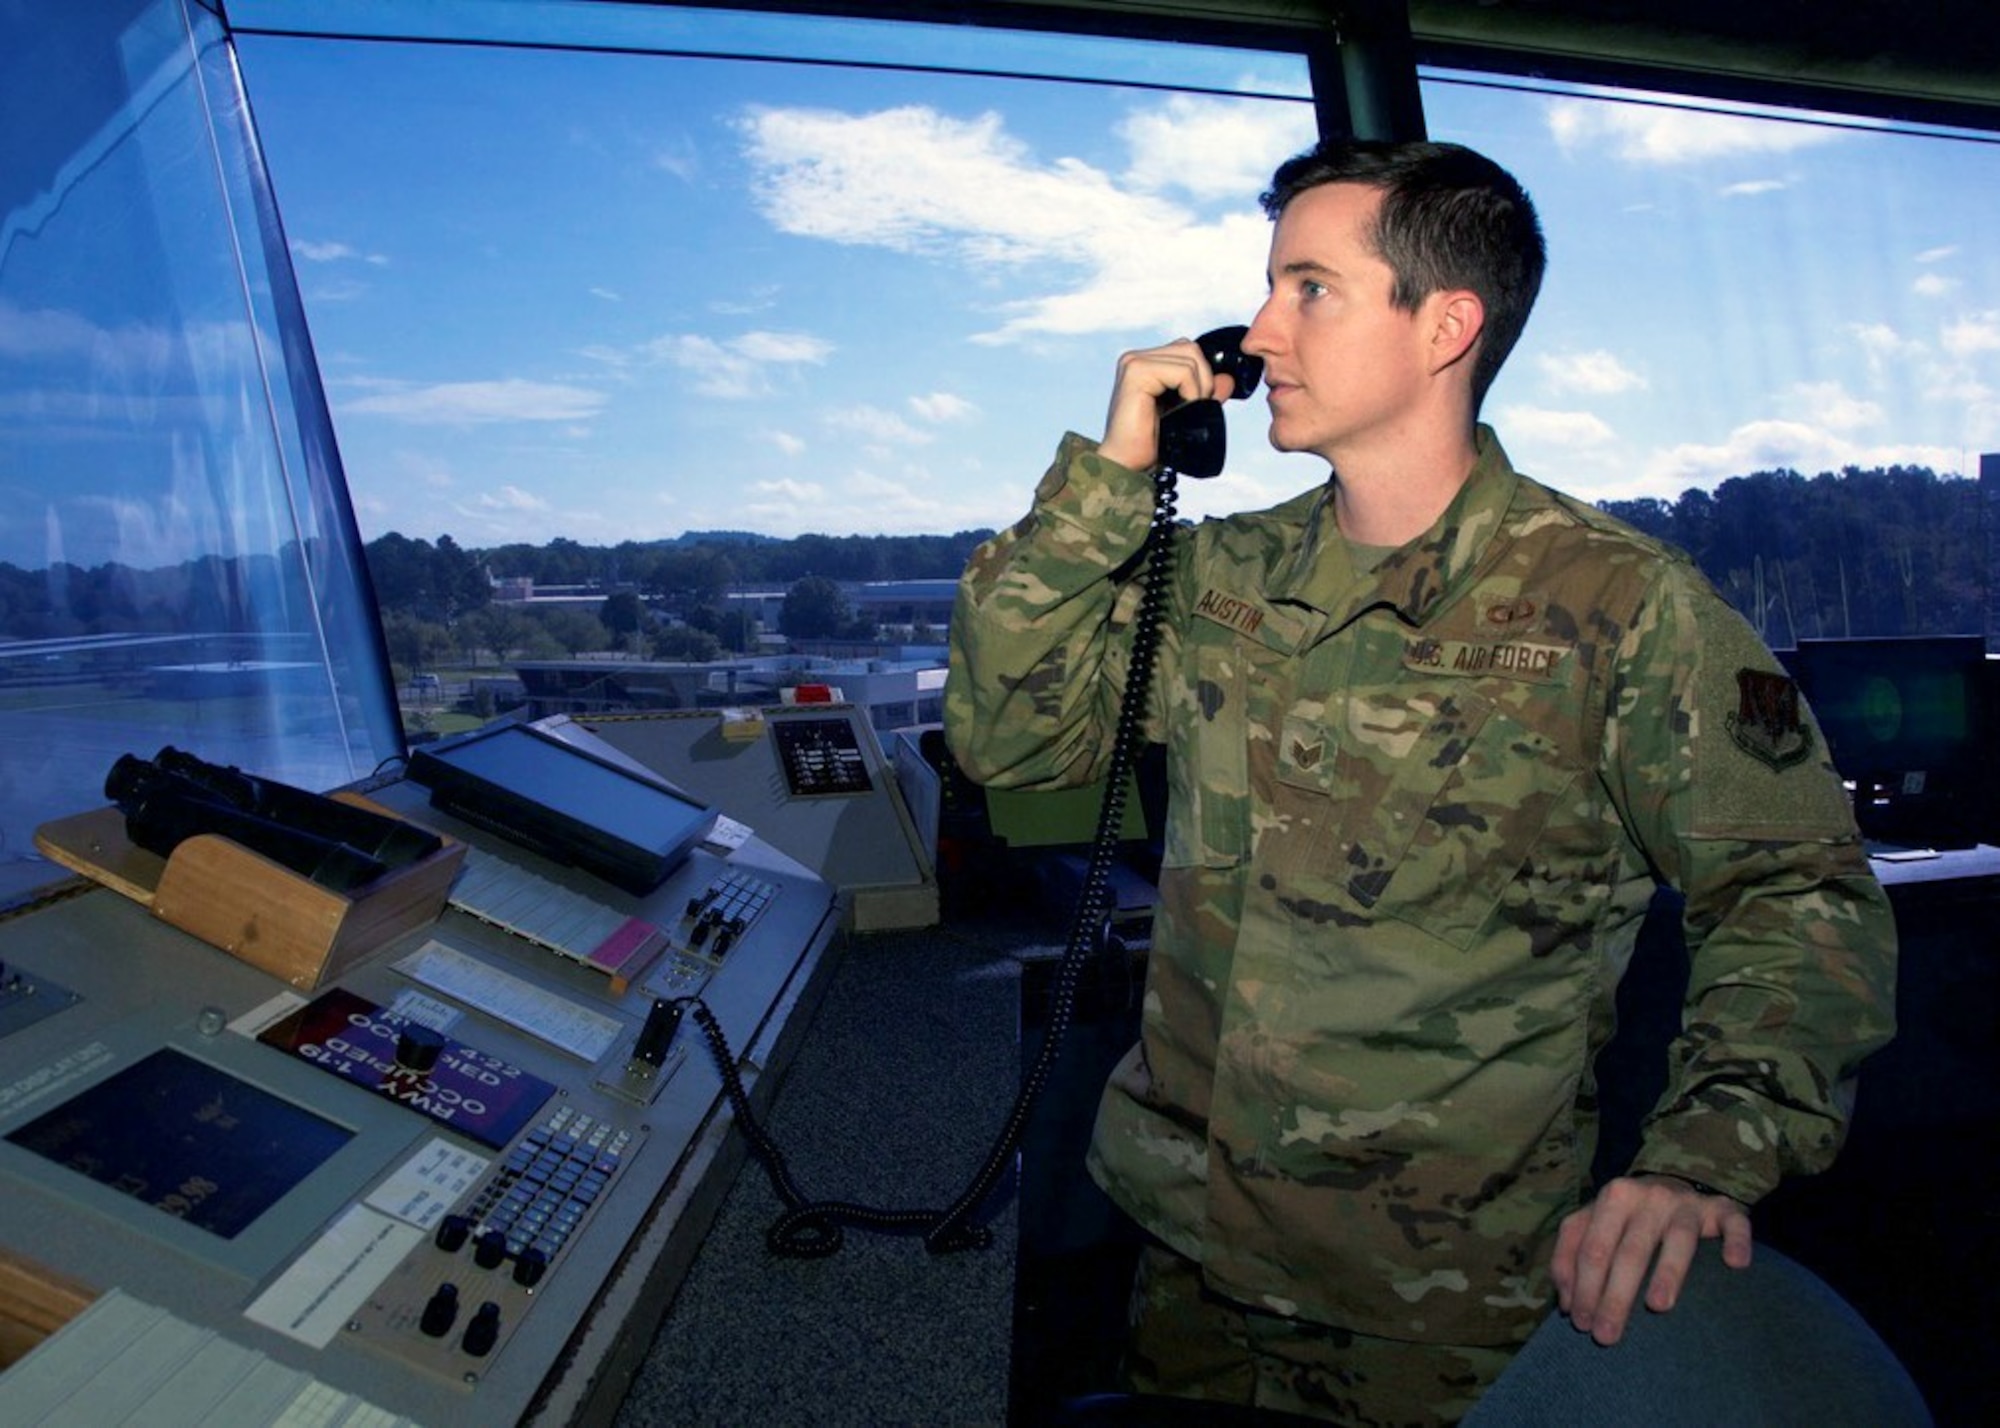 Staff Sgt. Kyle Austin, an air traffic controller with the 248th Air Traffic Control Squadron (ATCS), communicates with an aircraft at Key Field Air National Guard Base, Meridian, Mississippi, Sep. 12, 2020.